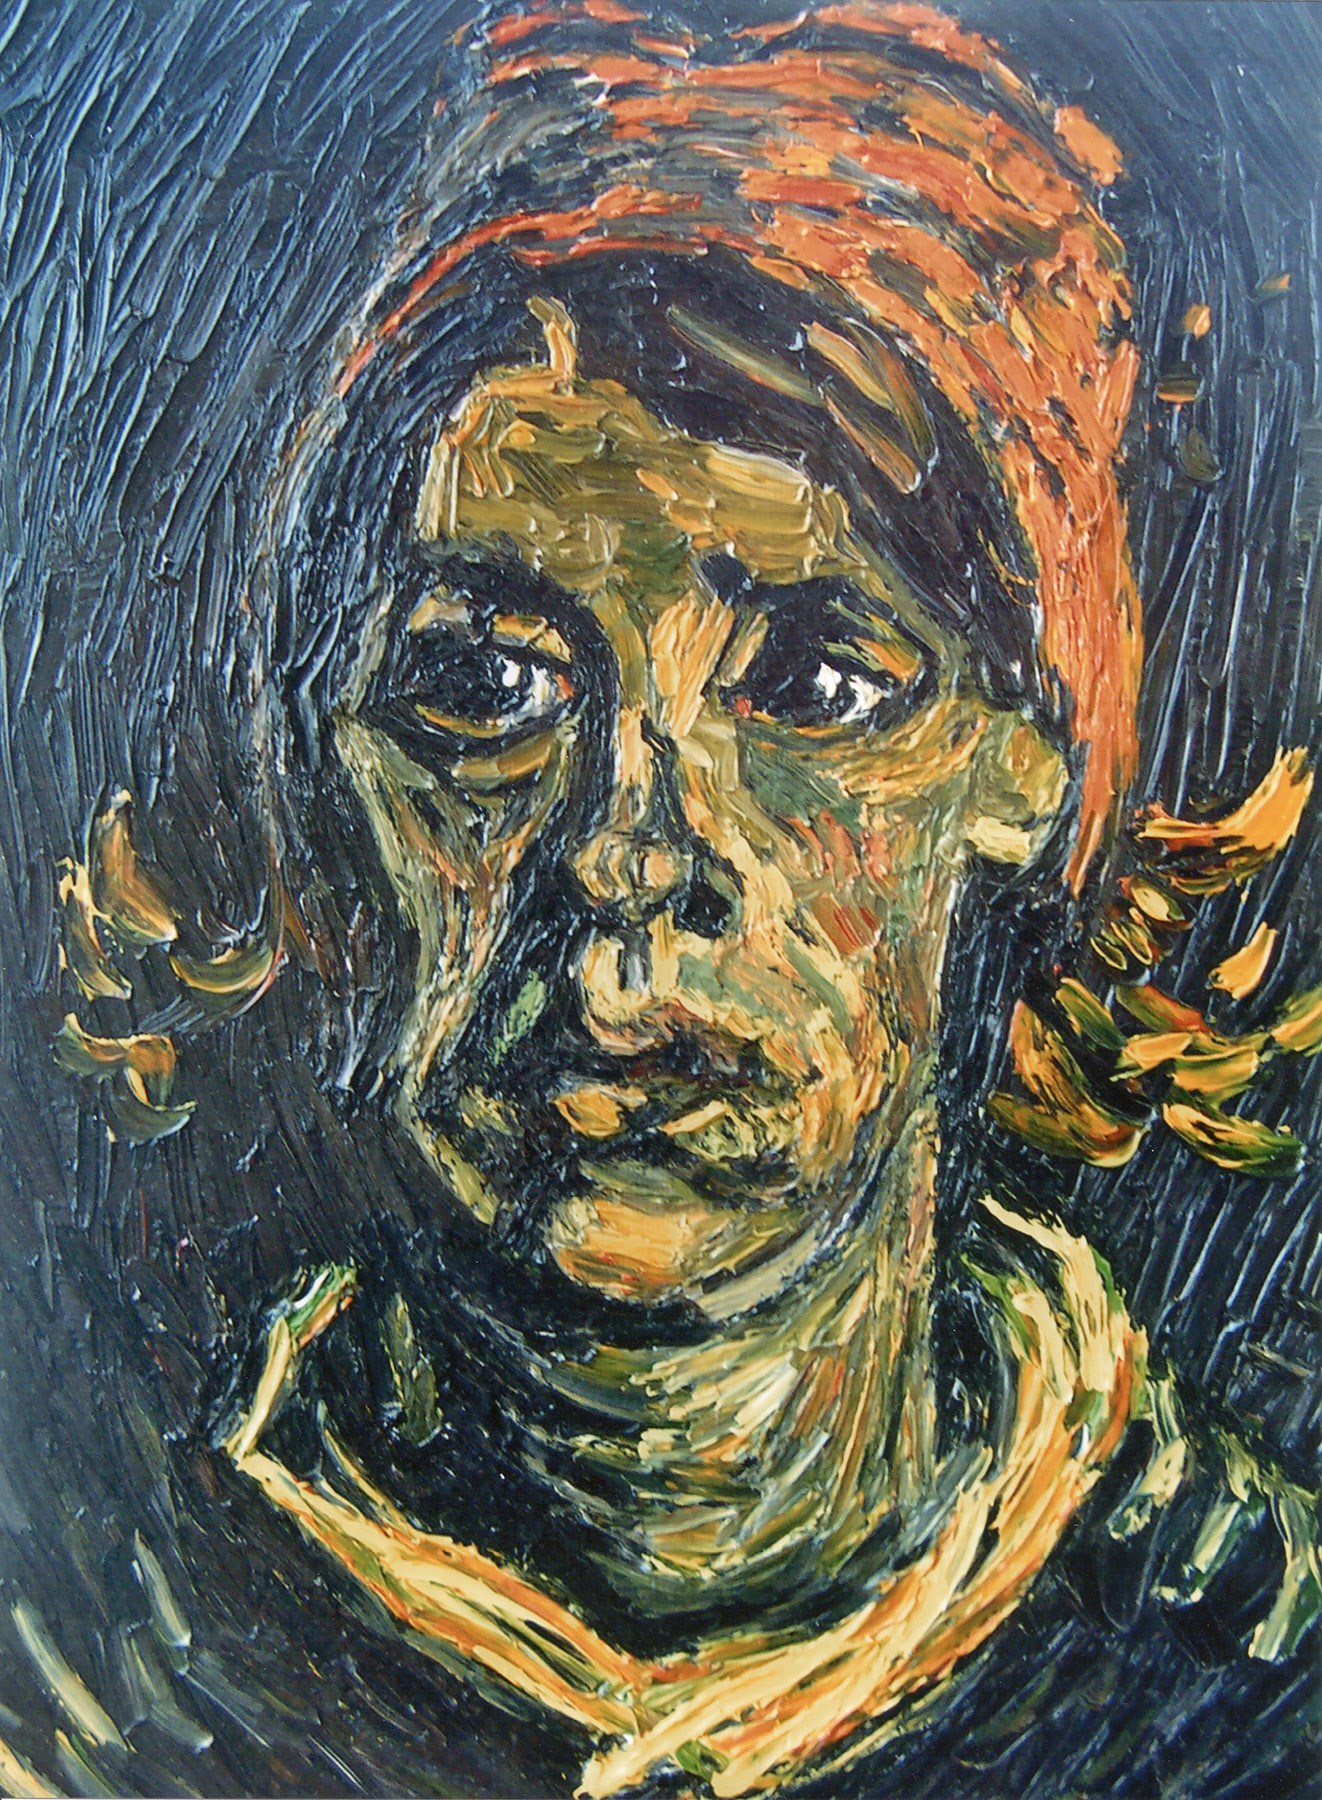 Reproductions and Copies of masterpieces oil on canvas Vincent Van Gogh revisited by Ida Parigi’s paintings: Head of a Woman